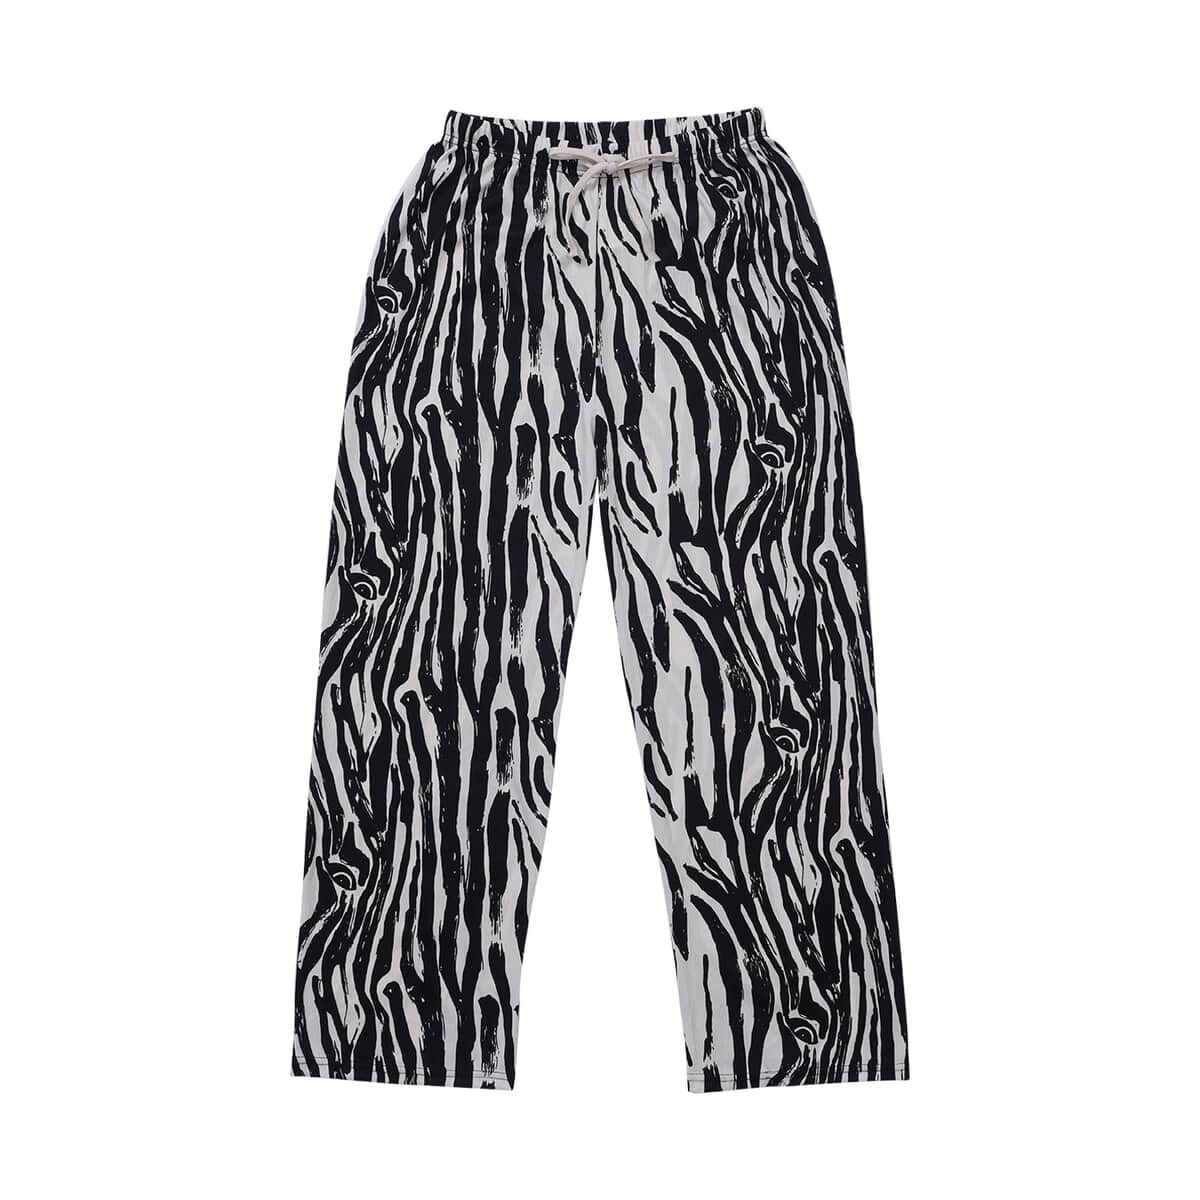 Set of 2 Gray and Zebra Rib Knit Stretch Lounge Pants - One Size Fits Most image number 0